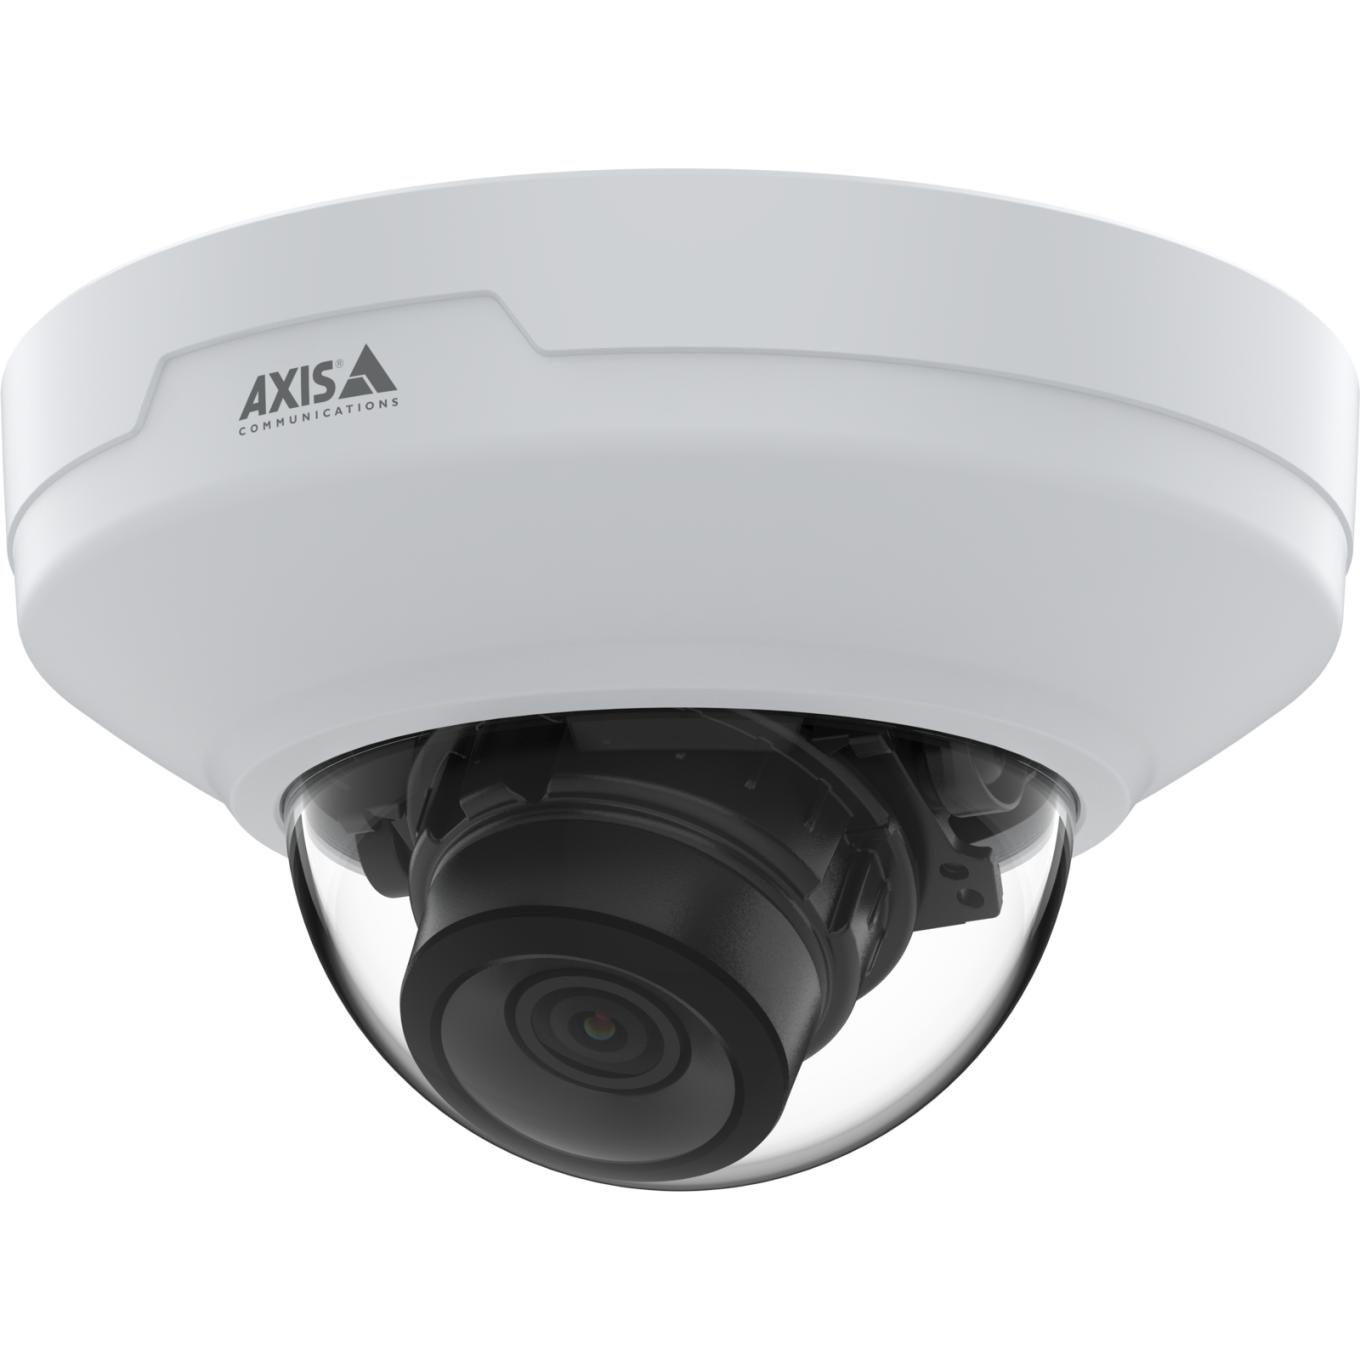 AXIS M4215-LV Dome Camera, viewed from its left angle